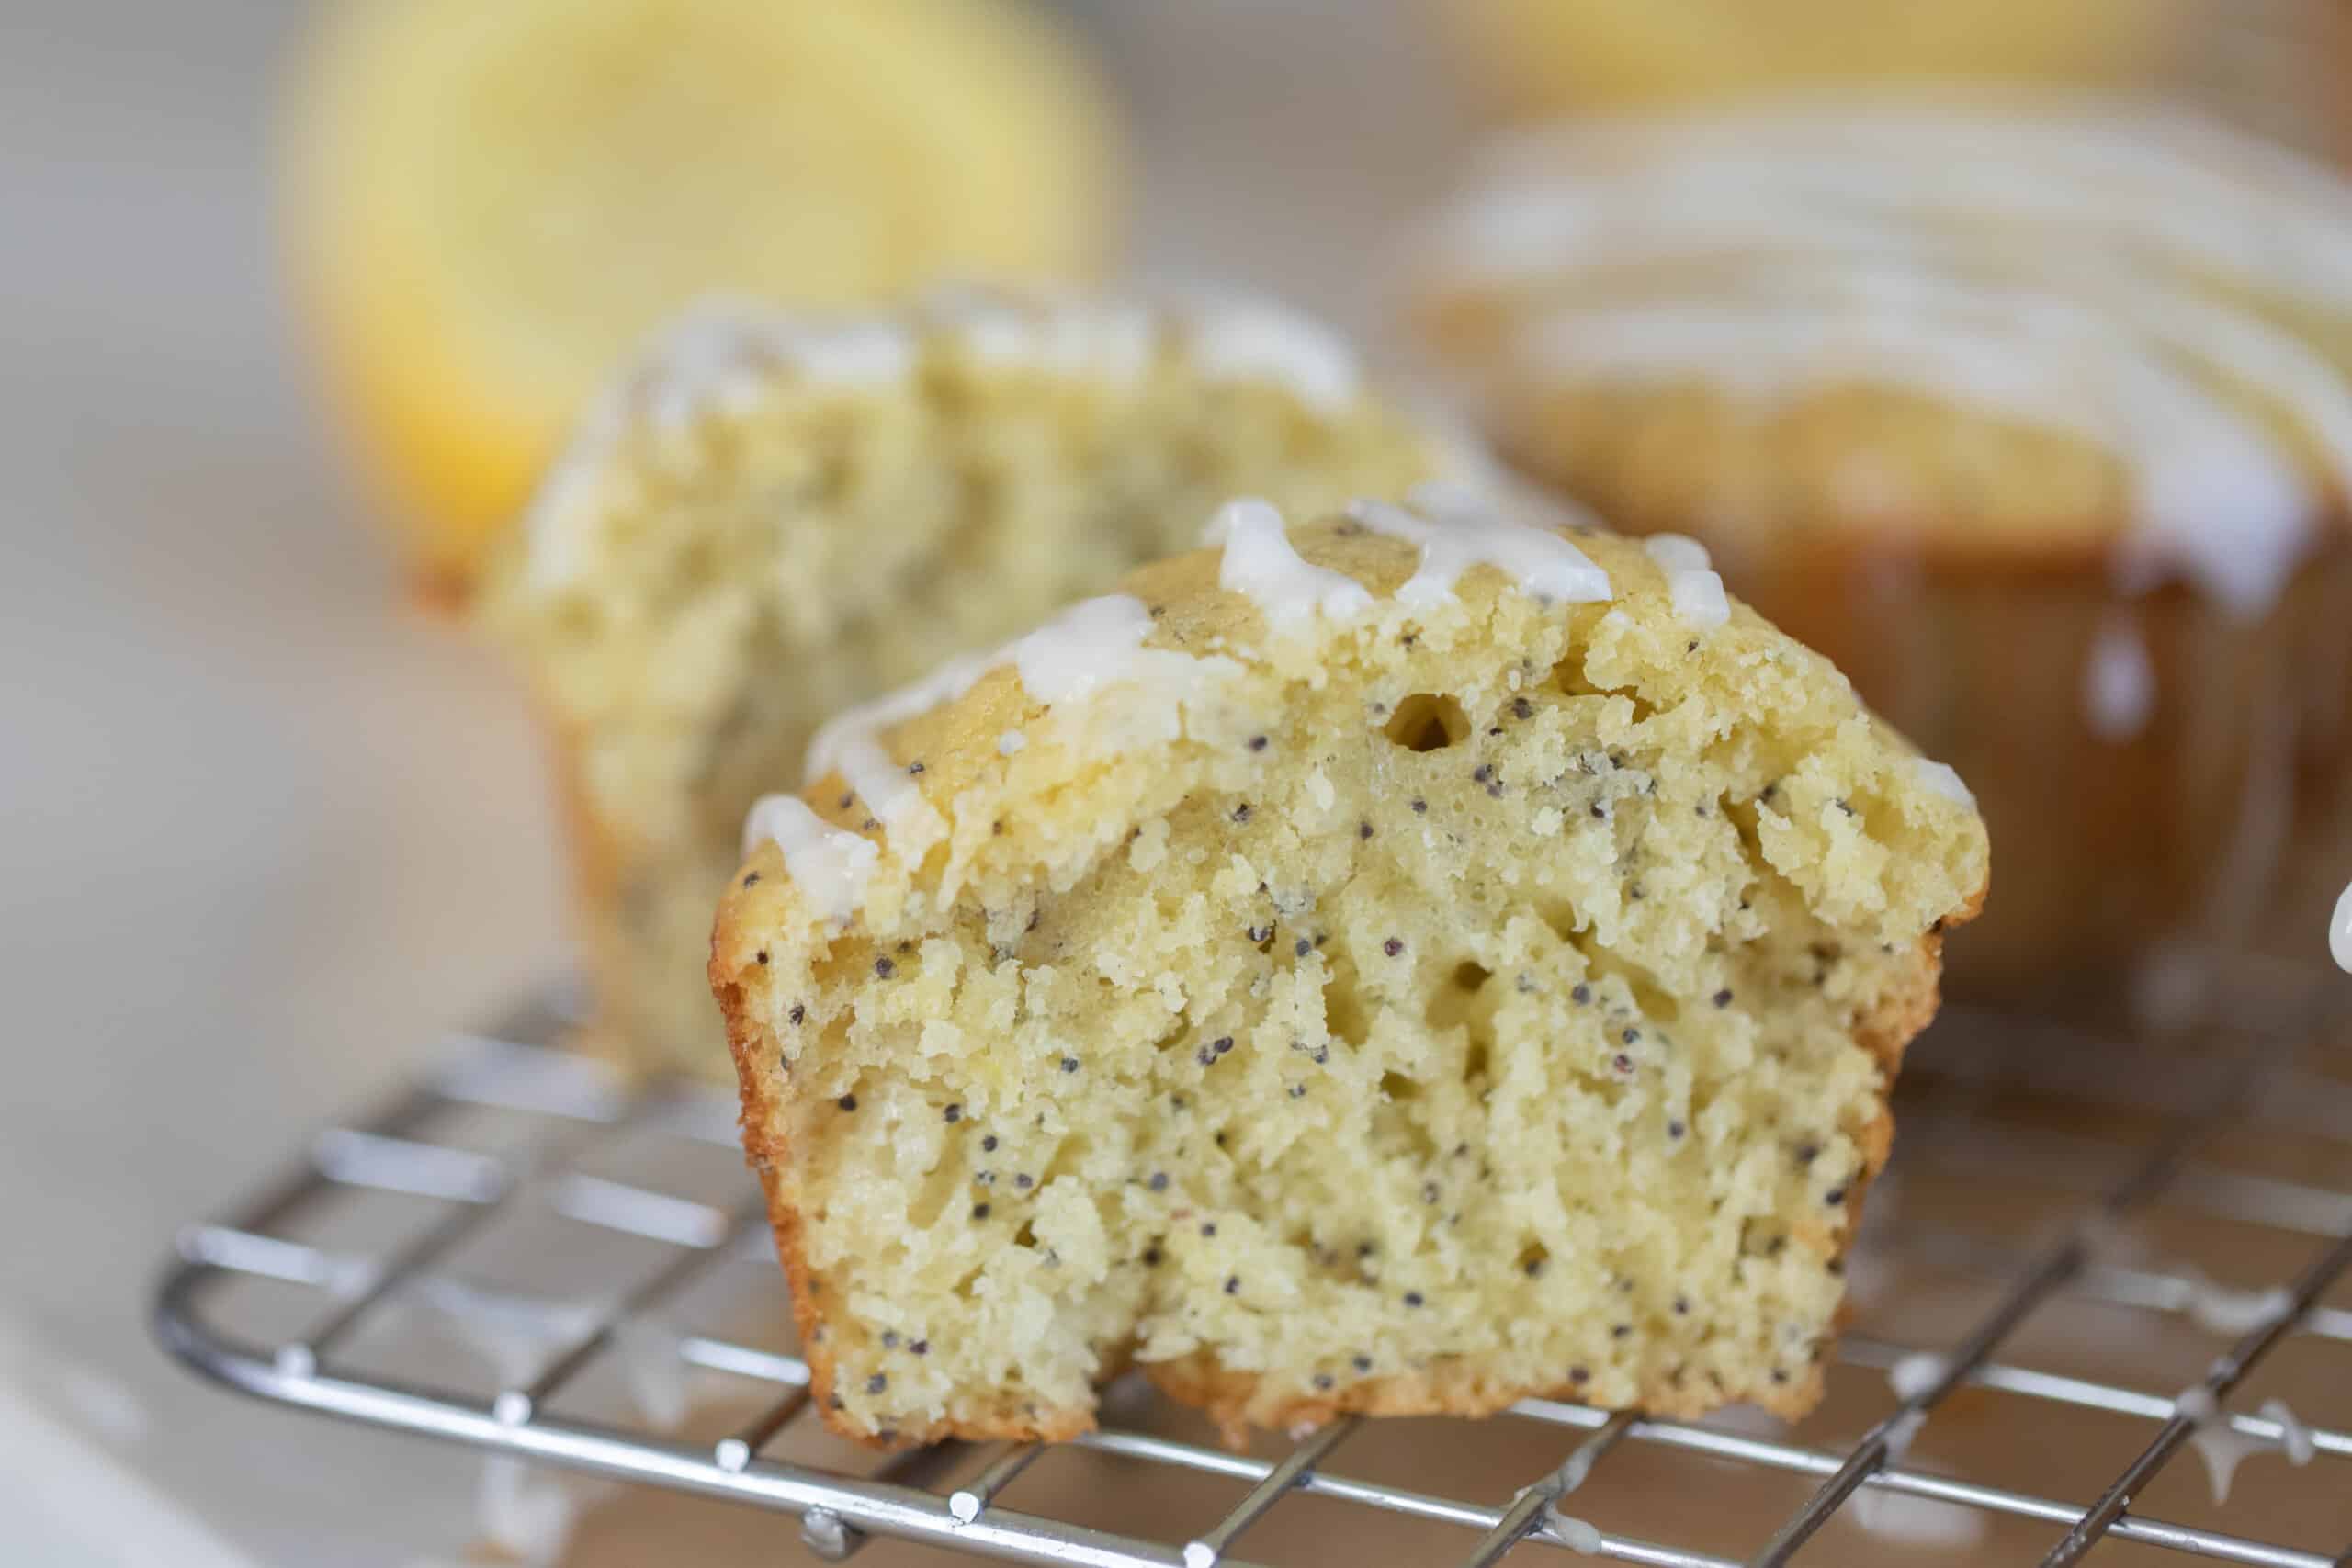 sourdough lemon poppyseed muffin sliced in half of a wire rack. Another muffin and a half of a lemon are in the background